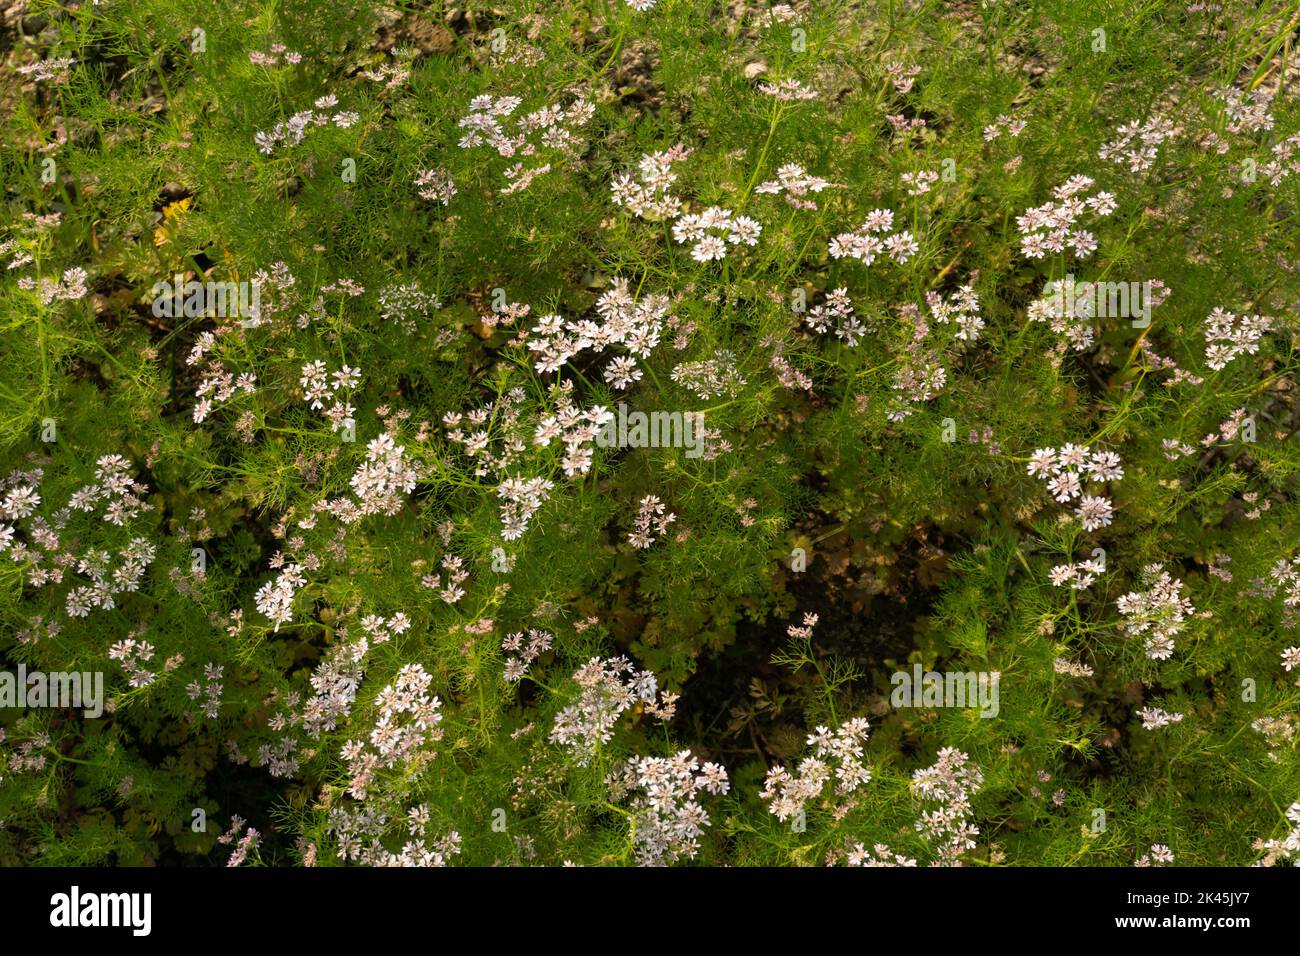 Coriander flower blooming in the coriander field. Coriander is an annual herb in the family of Apiaceae. It is also known as Chinese parsley, dhania, Stock Photo